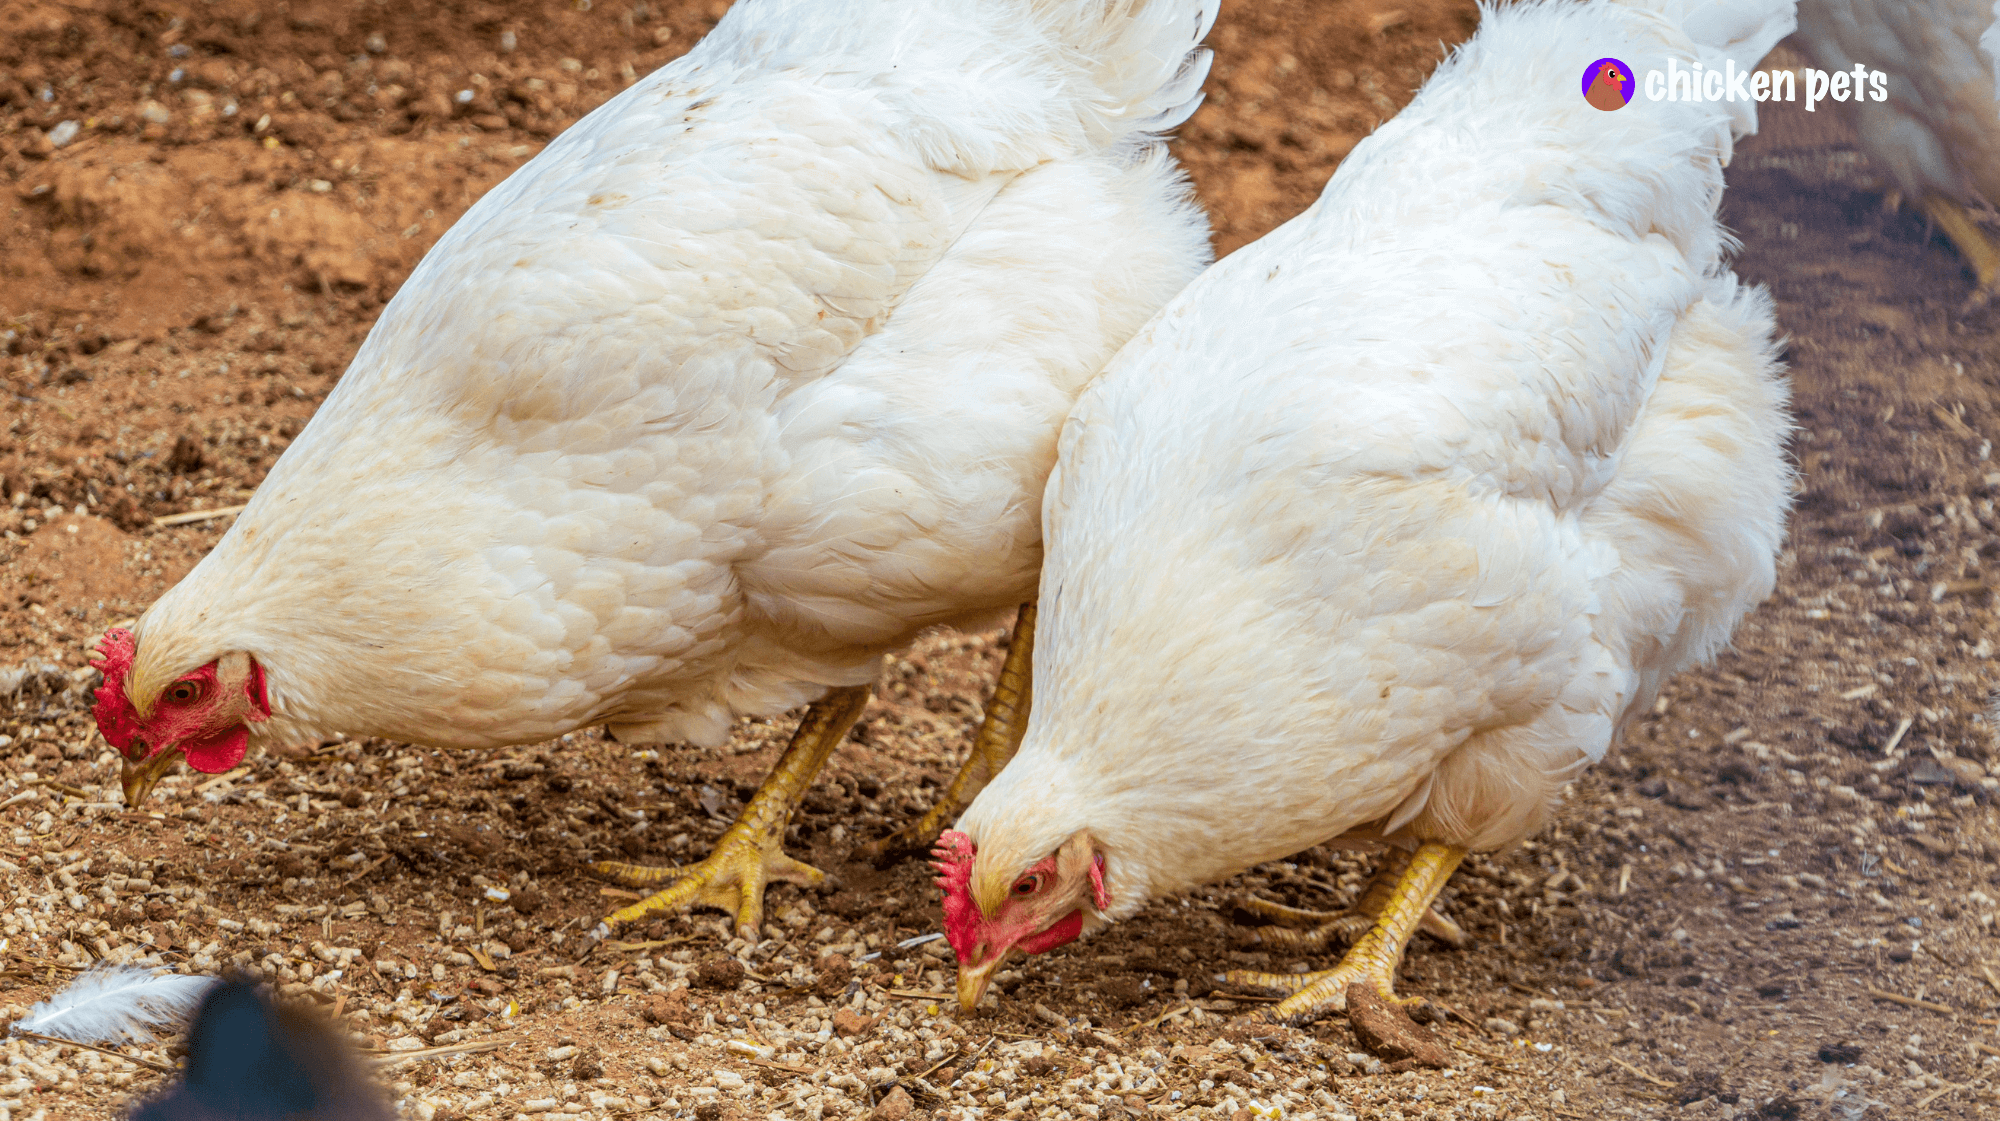 What Do Amberlink Chickens Look Like?